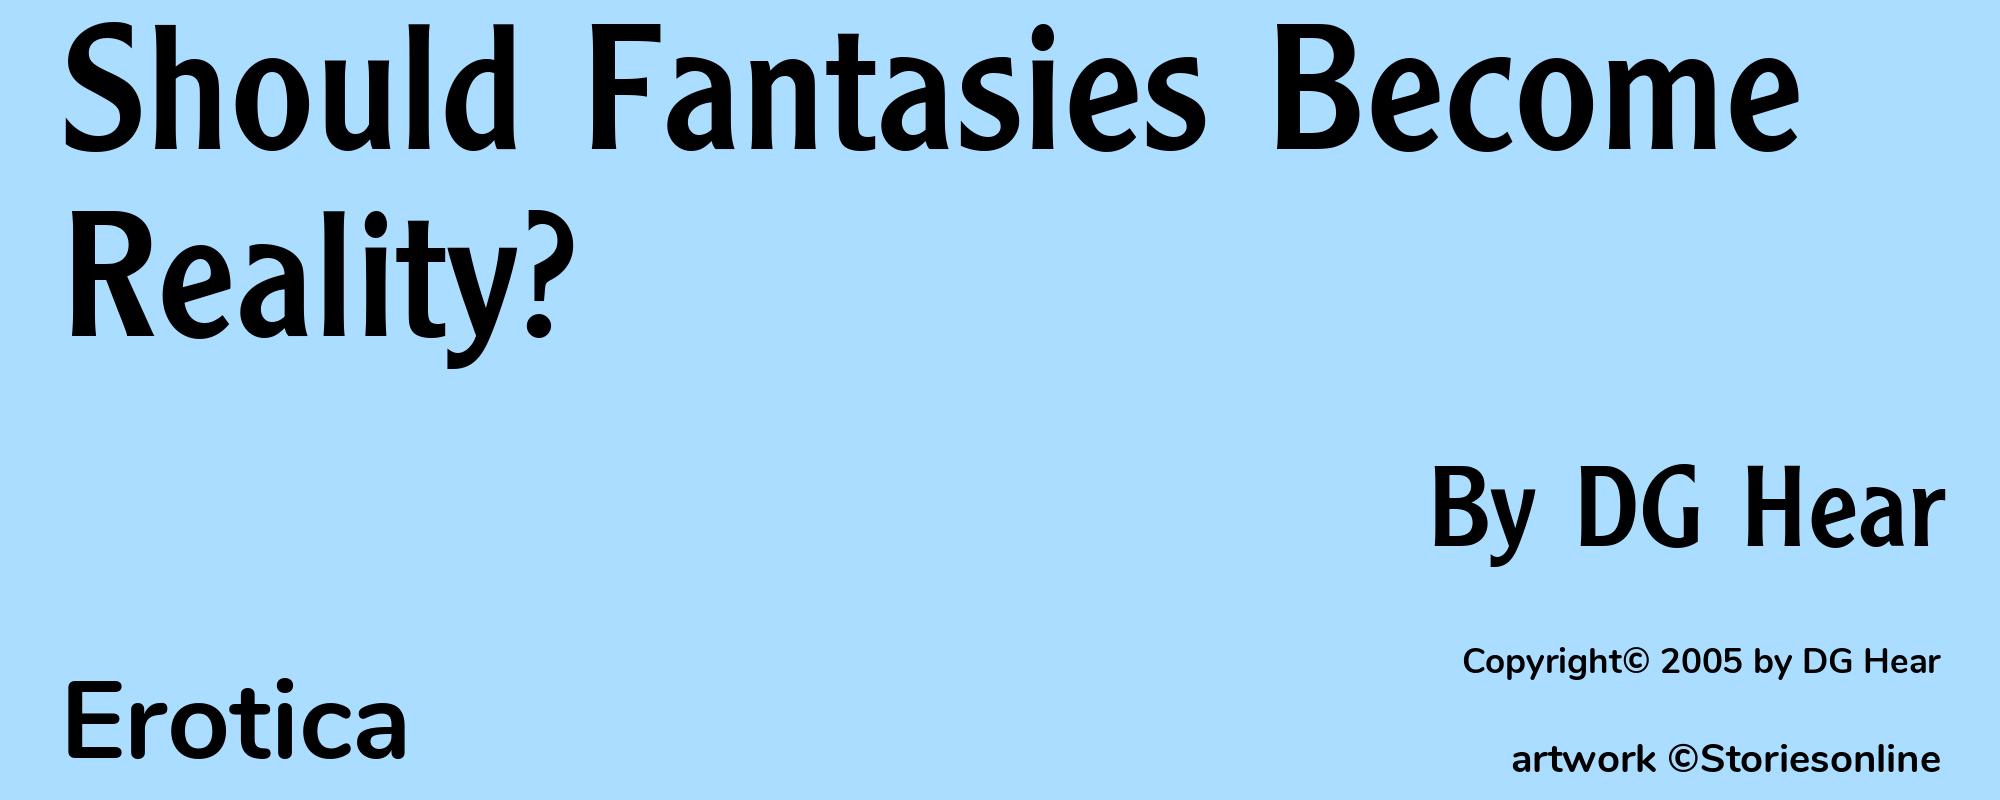 Should Fantasies Become Reality? - Cover